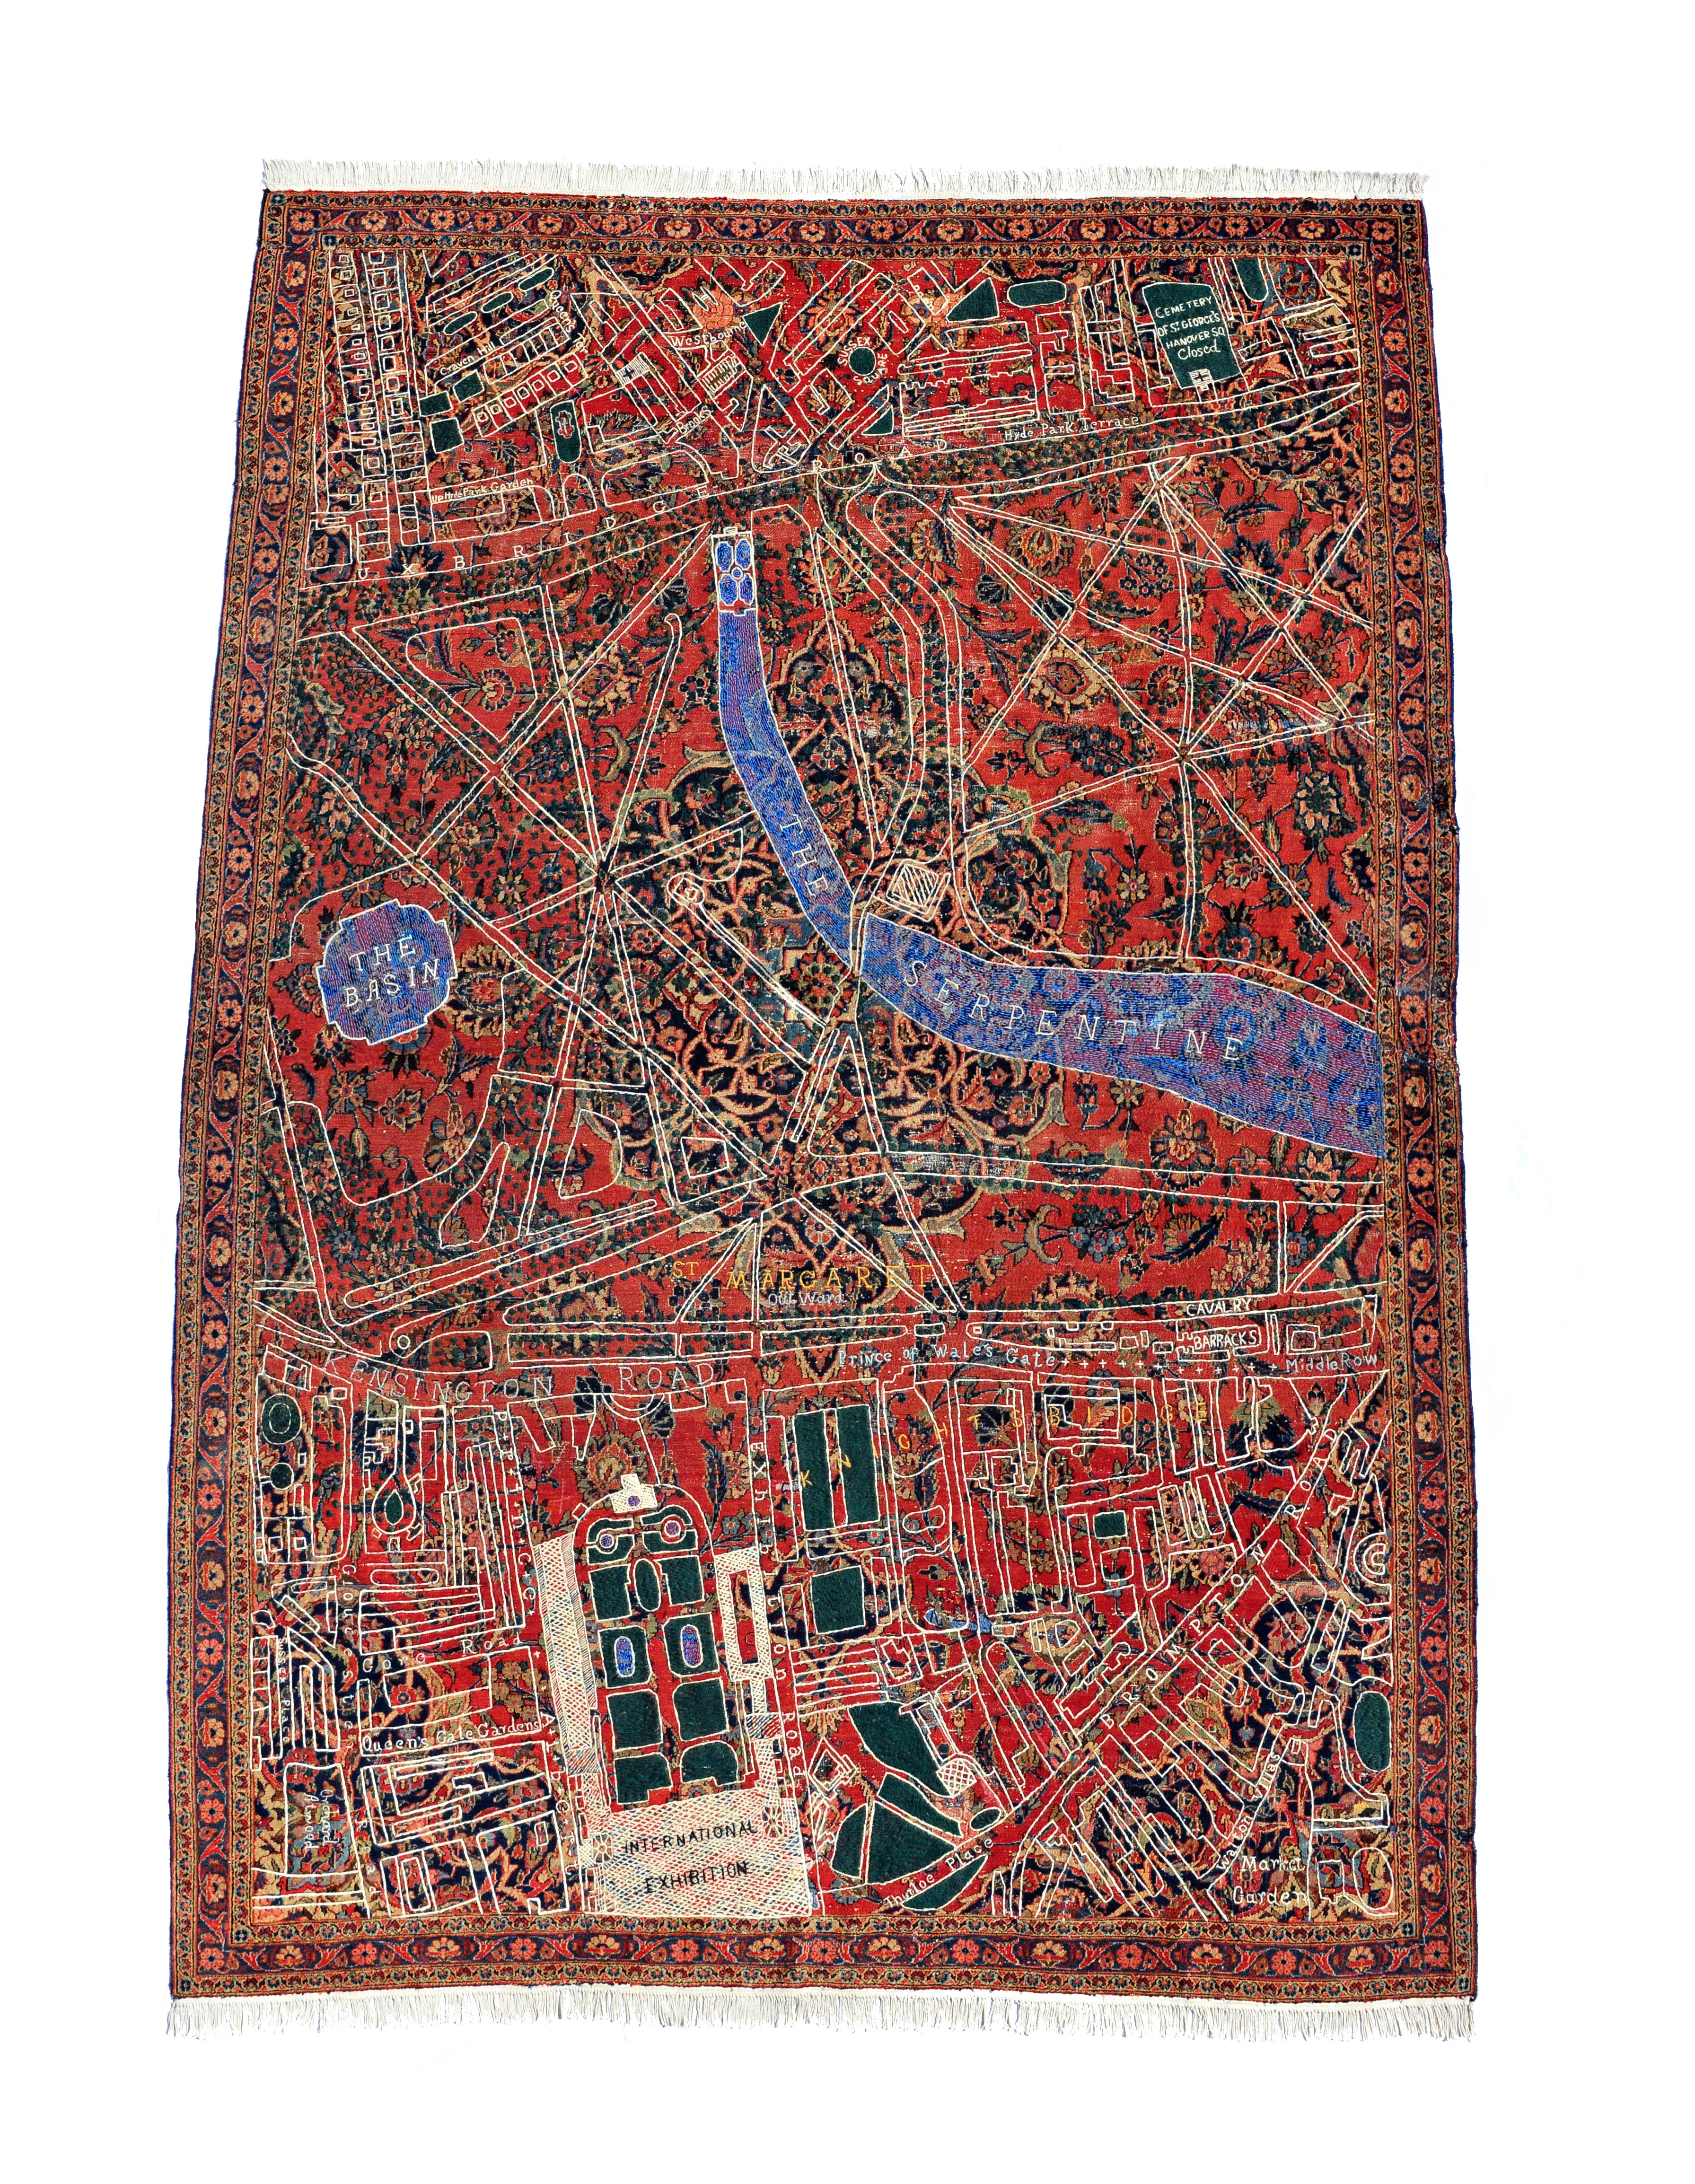 2011, hand-knotted carpet with dyed-wool embroidery, 350.5 × 238.7 cm. Collection of AMA Foundation, Chile.